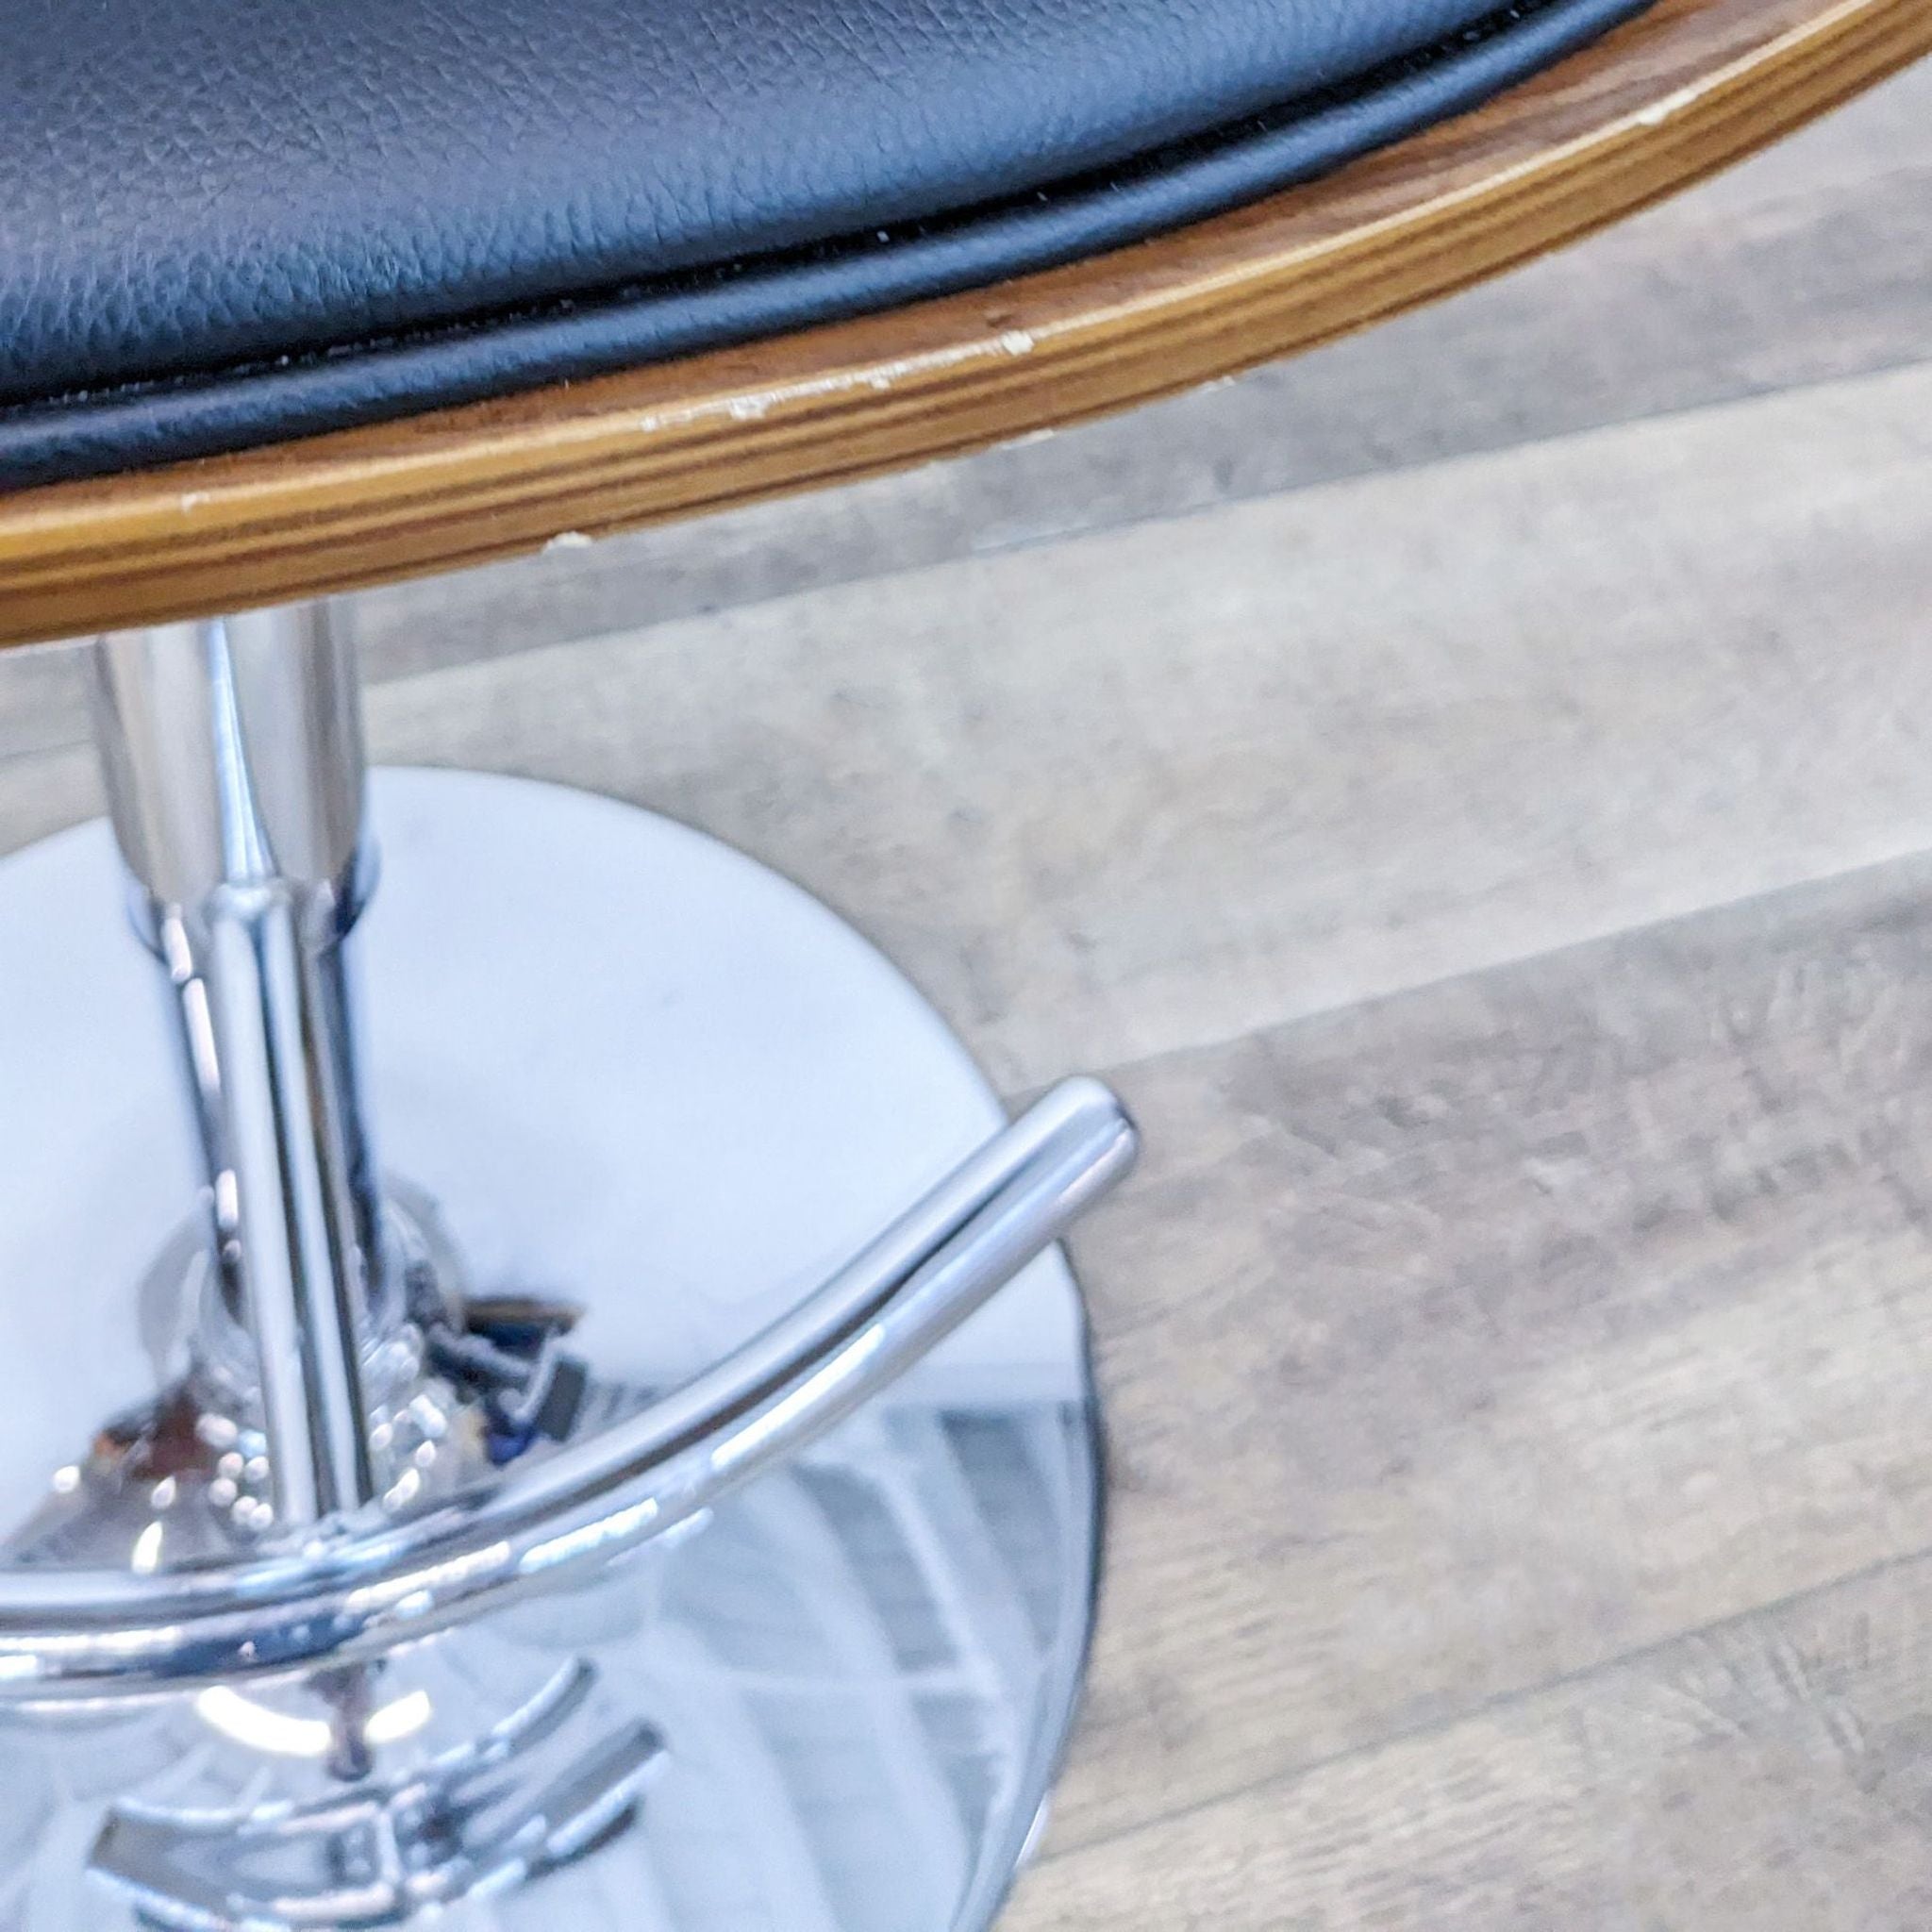 Close-up view of Reperch swivel stool detailing the black padded seat and wood finish.